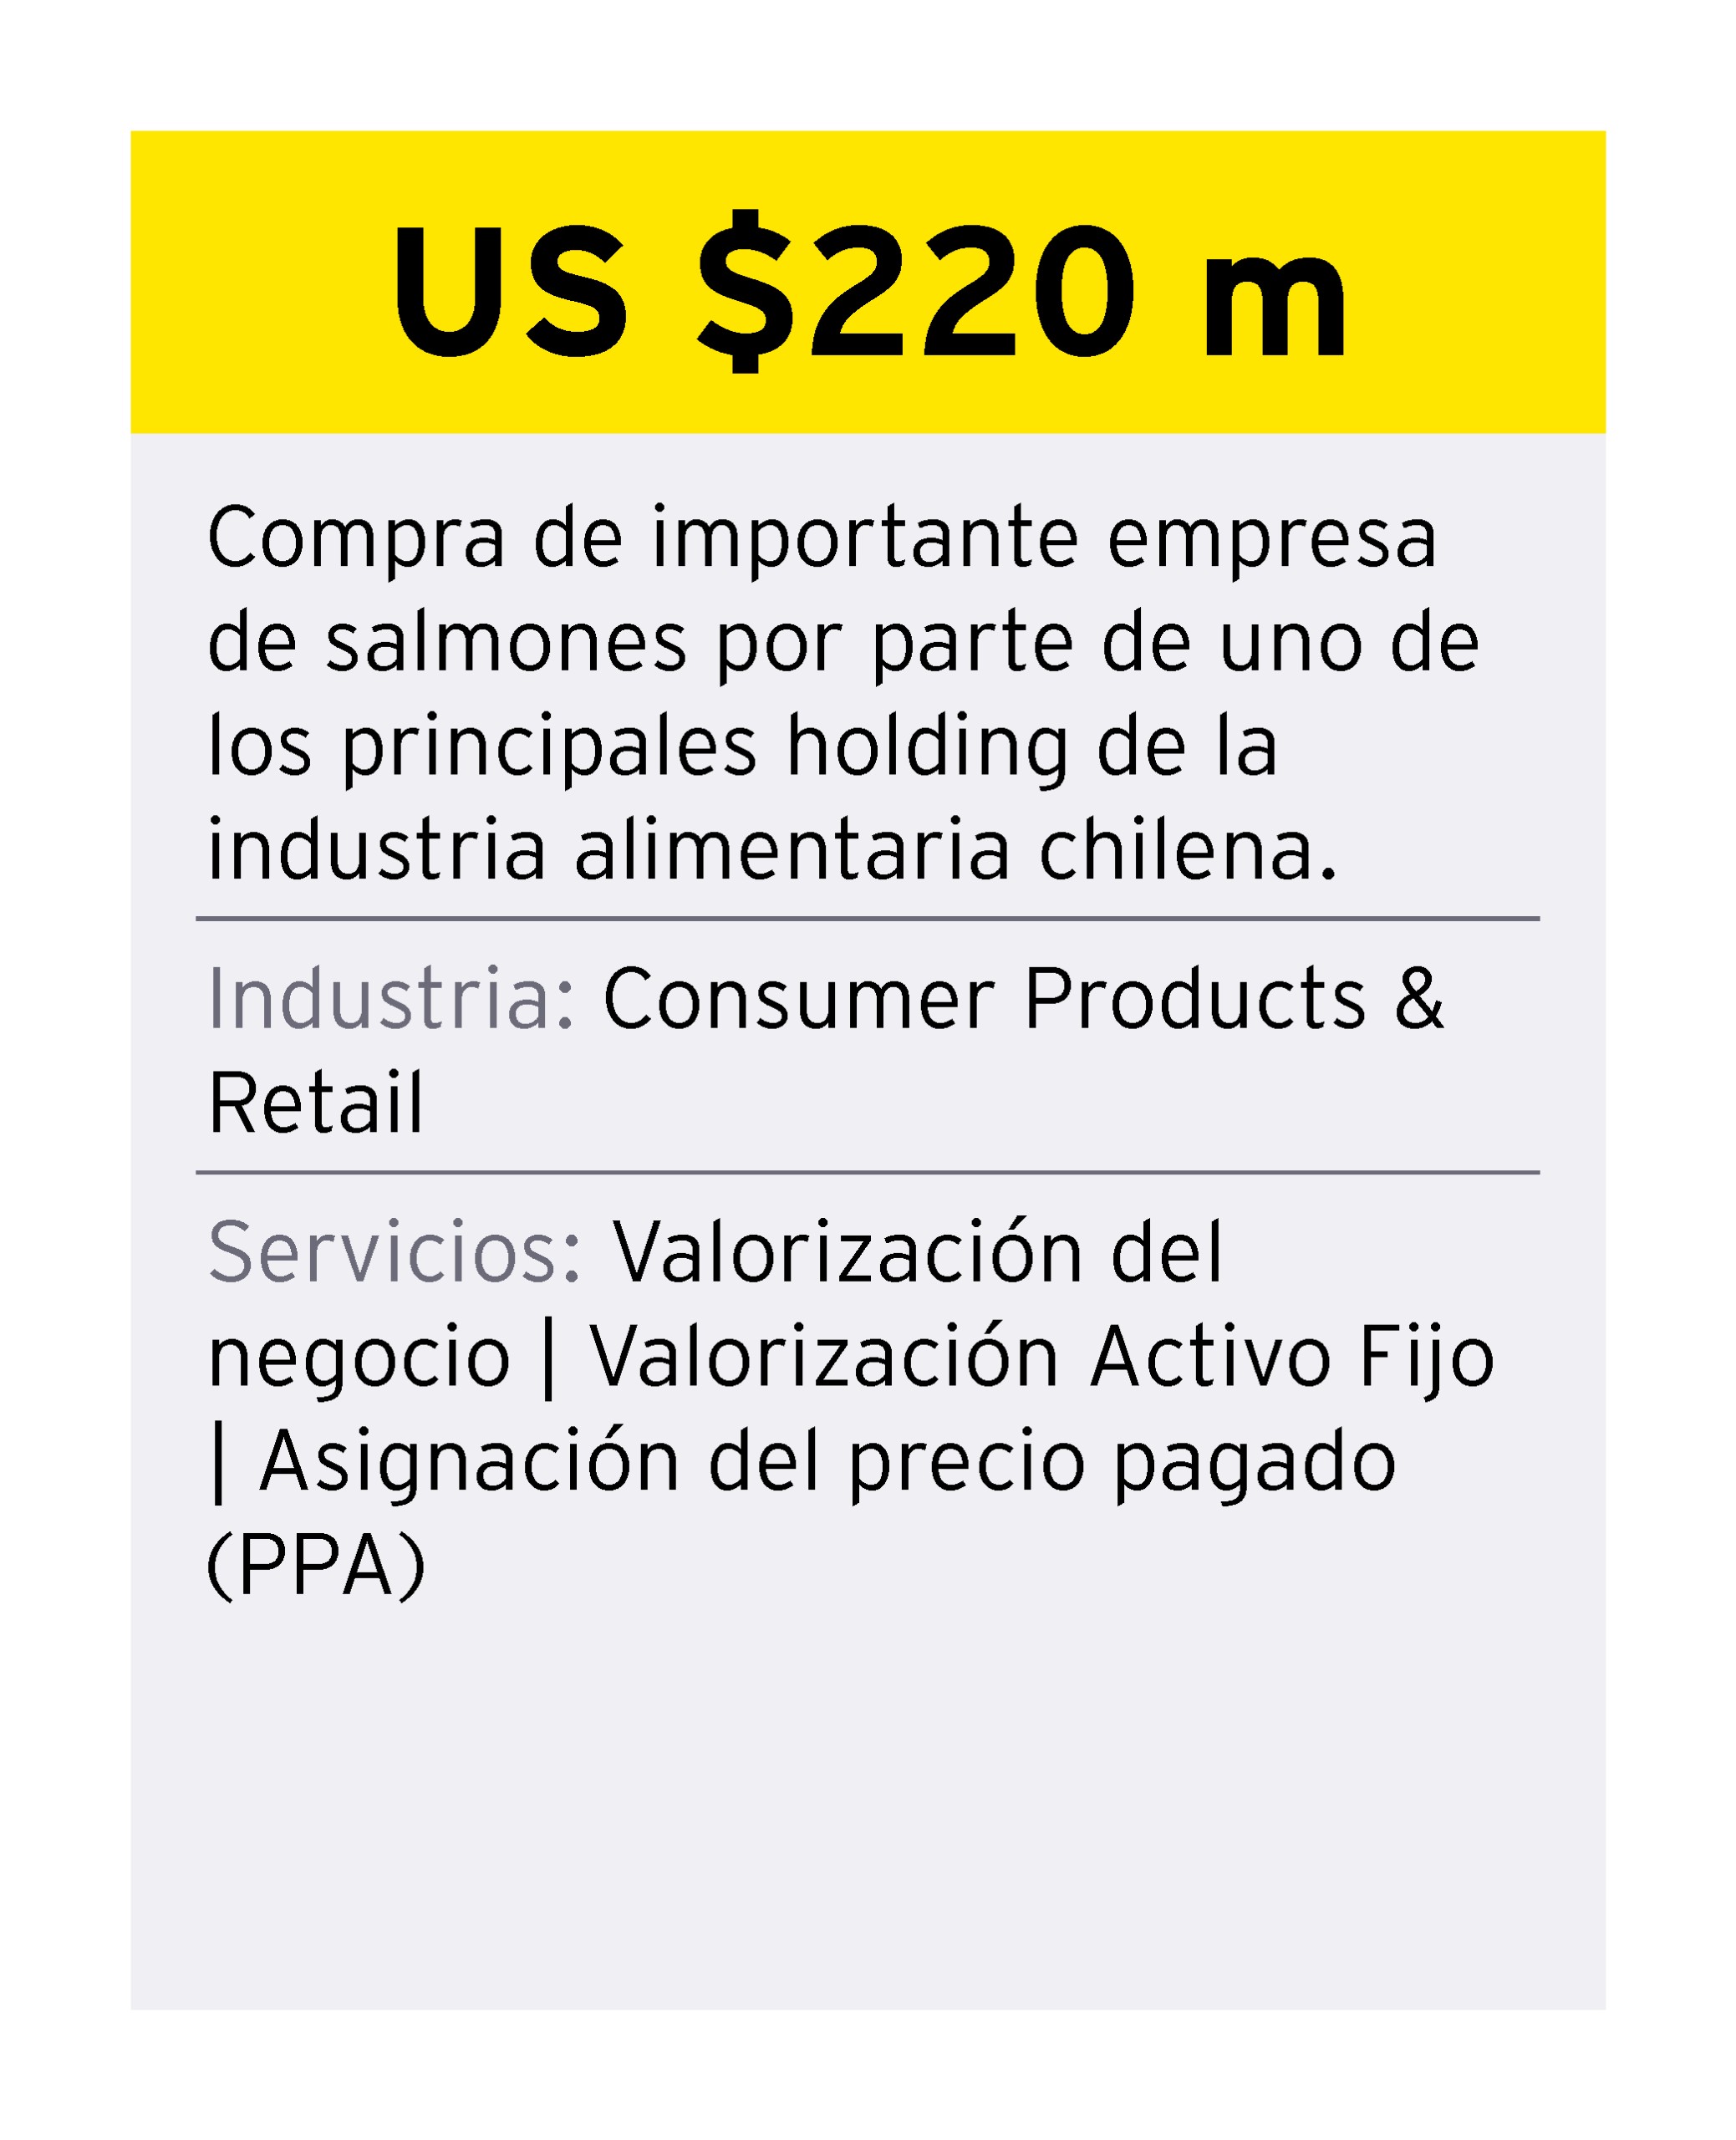 ey-chile-credencial-1-advanced-manufacturing